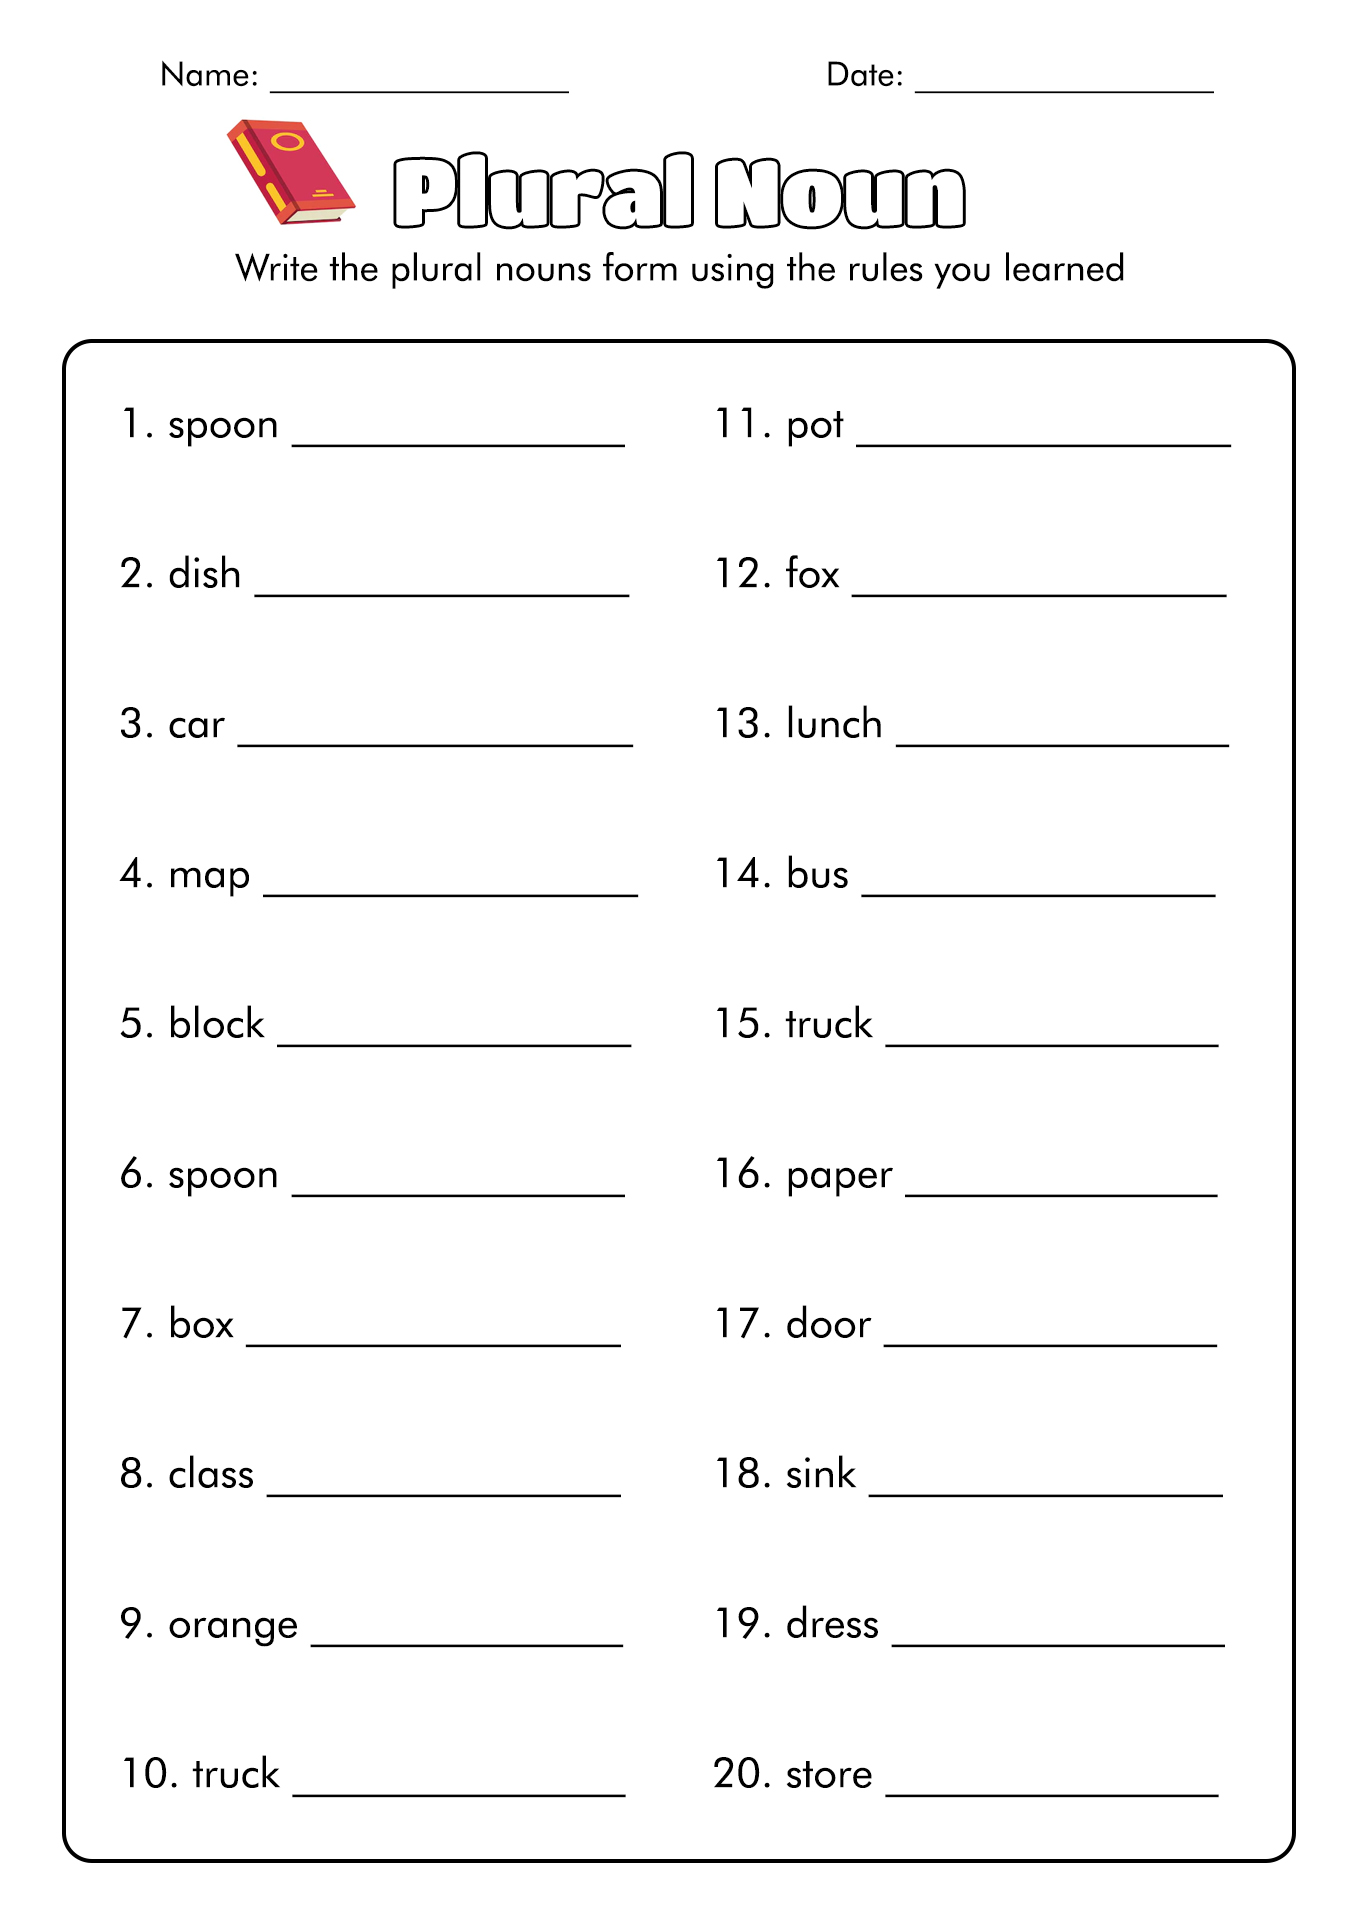 19-best-images-of-2nd-grade-english-worksheets-nouns-verbs-printable-verbs-worksheets-4th